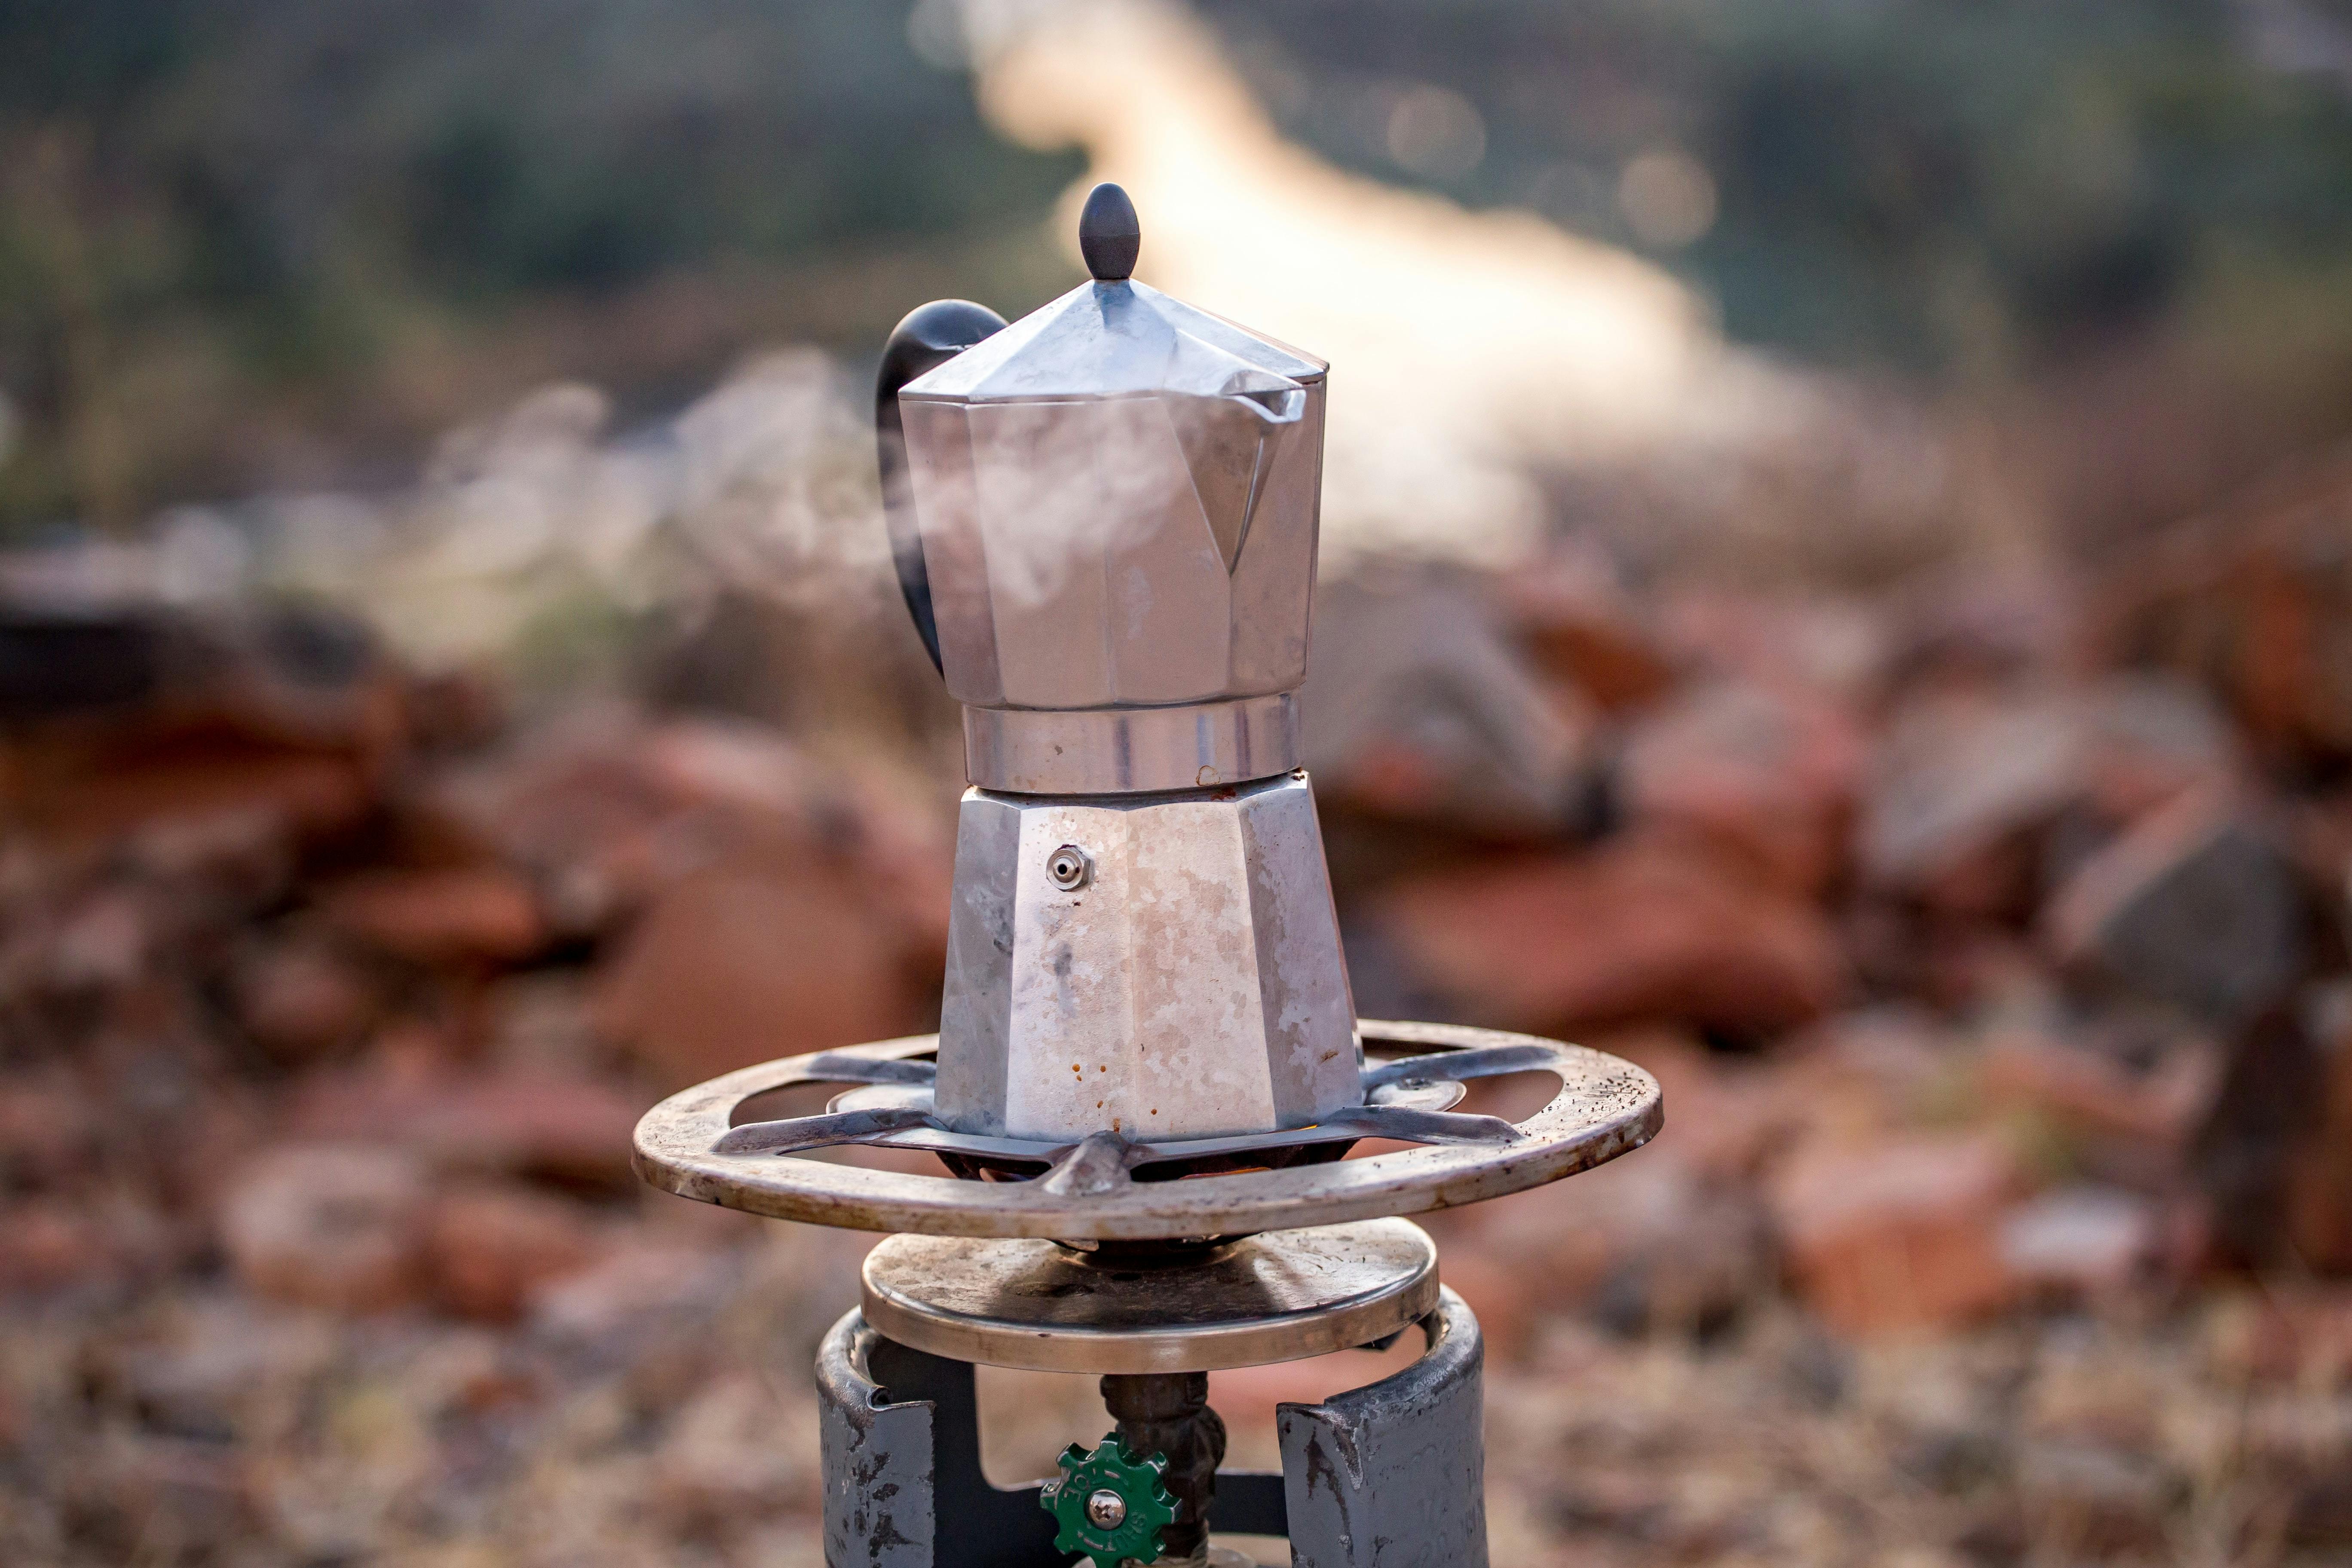 A moka pot coffee maker sits on a camp stove and releases steam